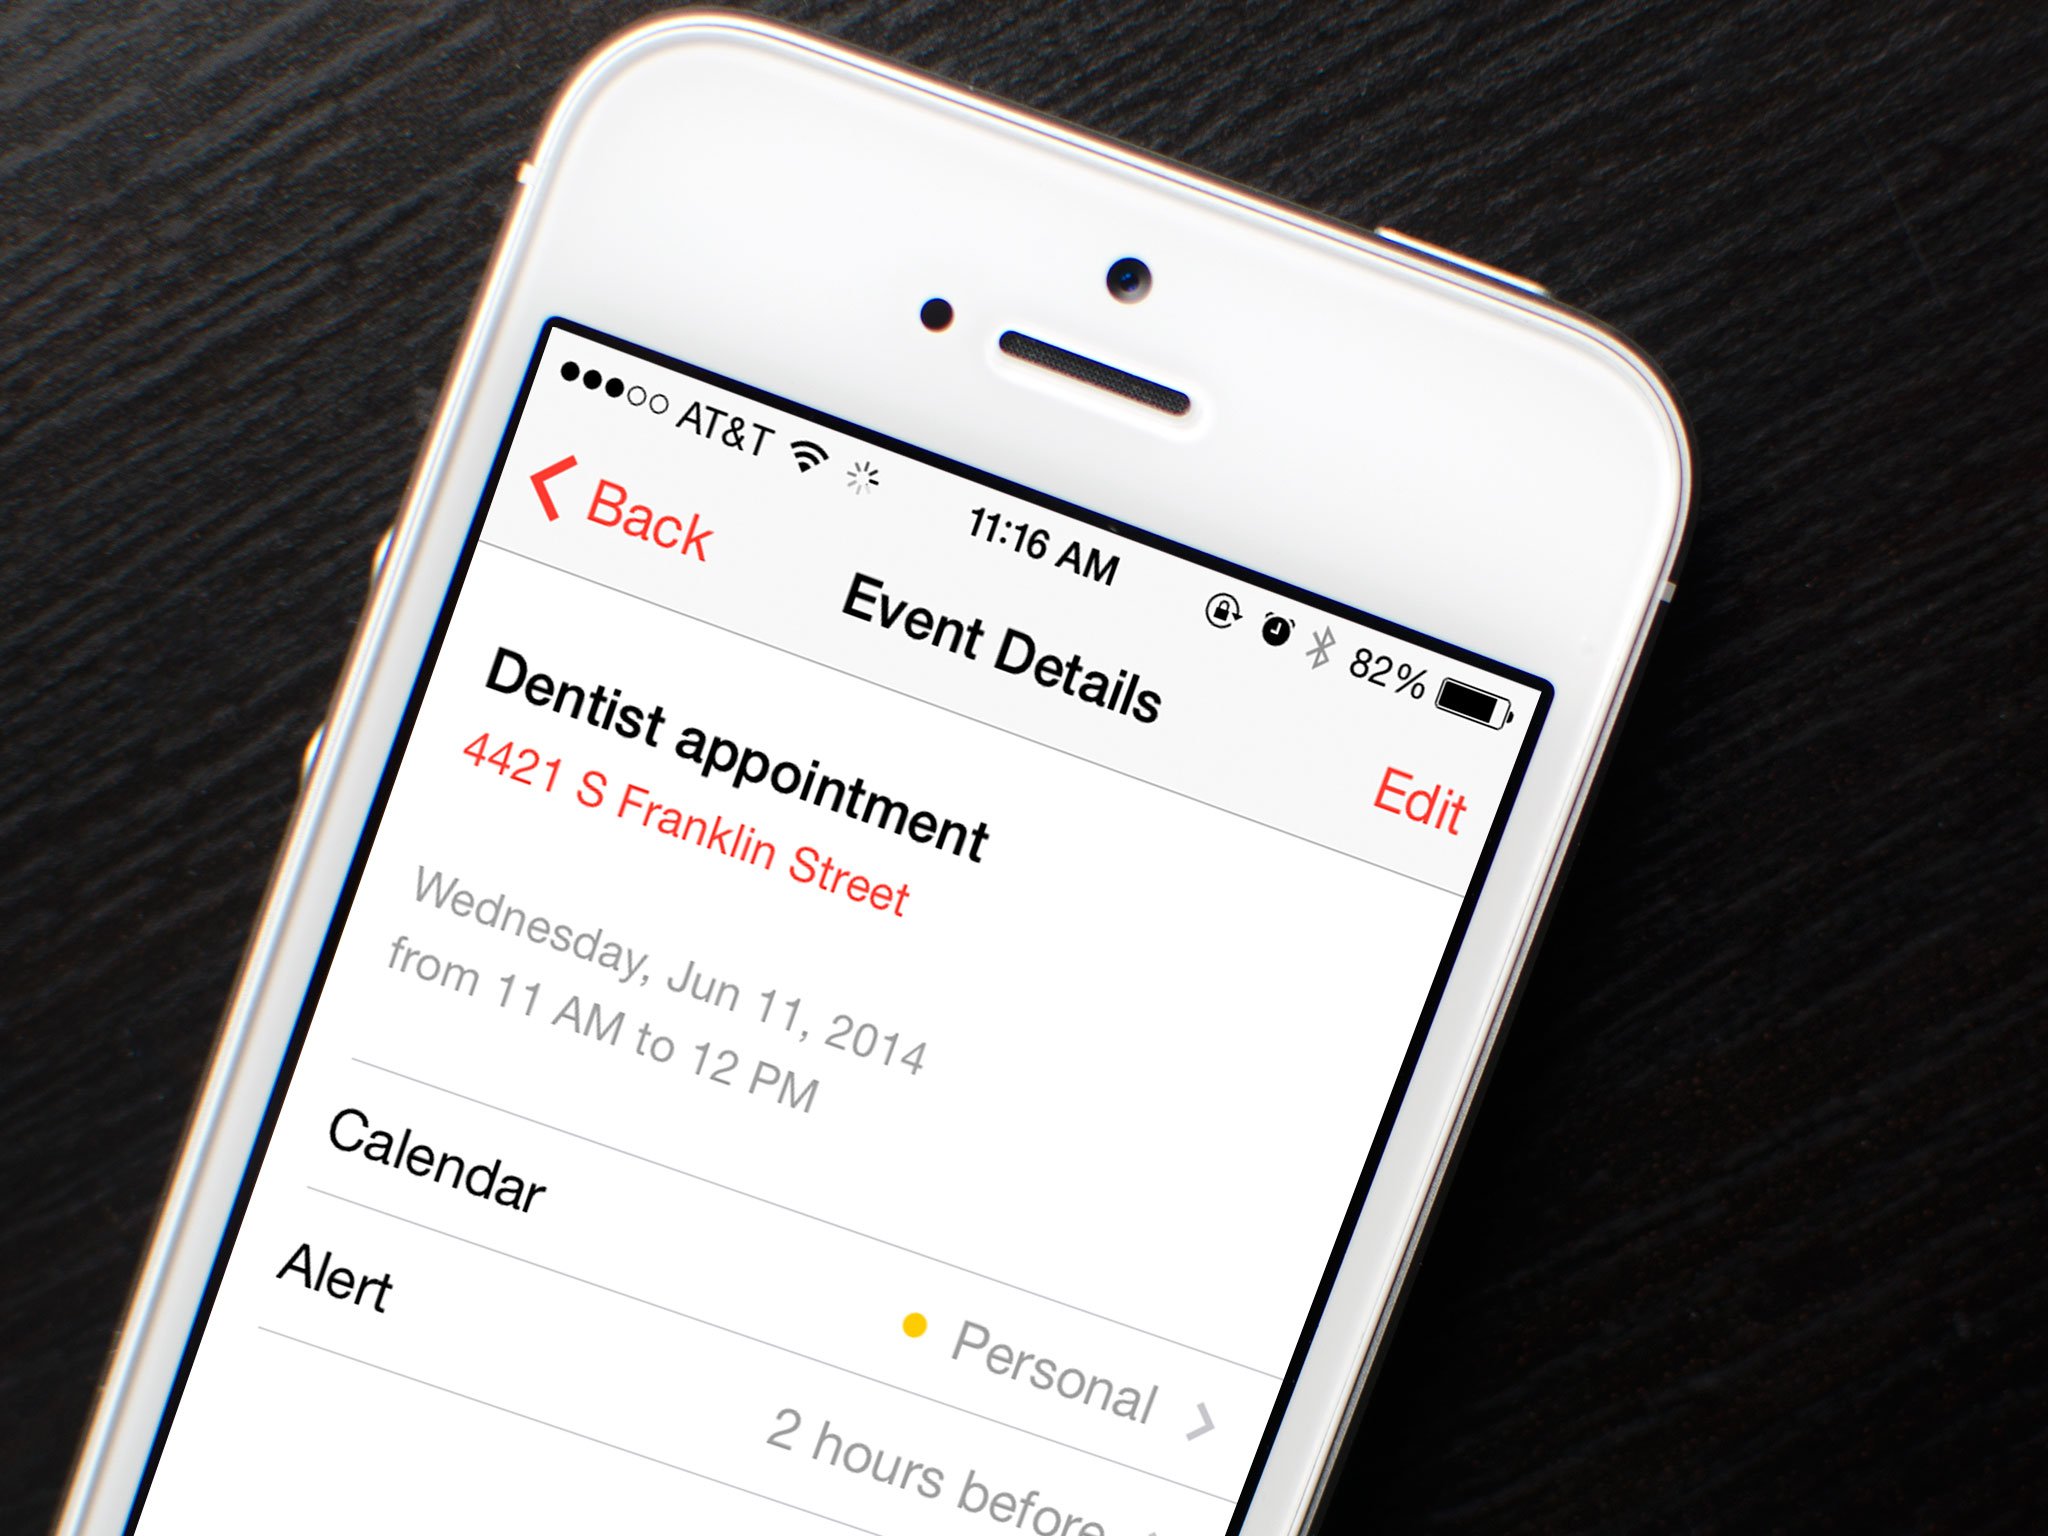 How to create, edit, and delete Calendar events on your iPhone or iPad